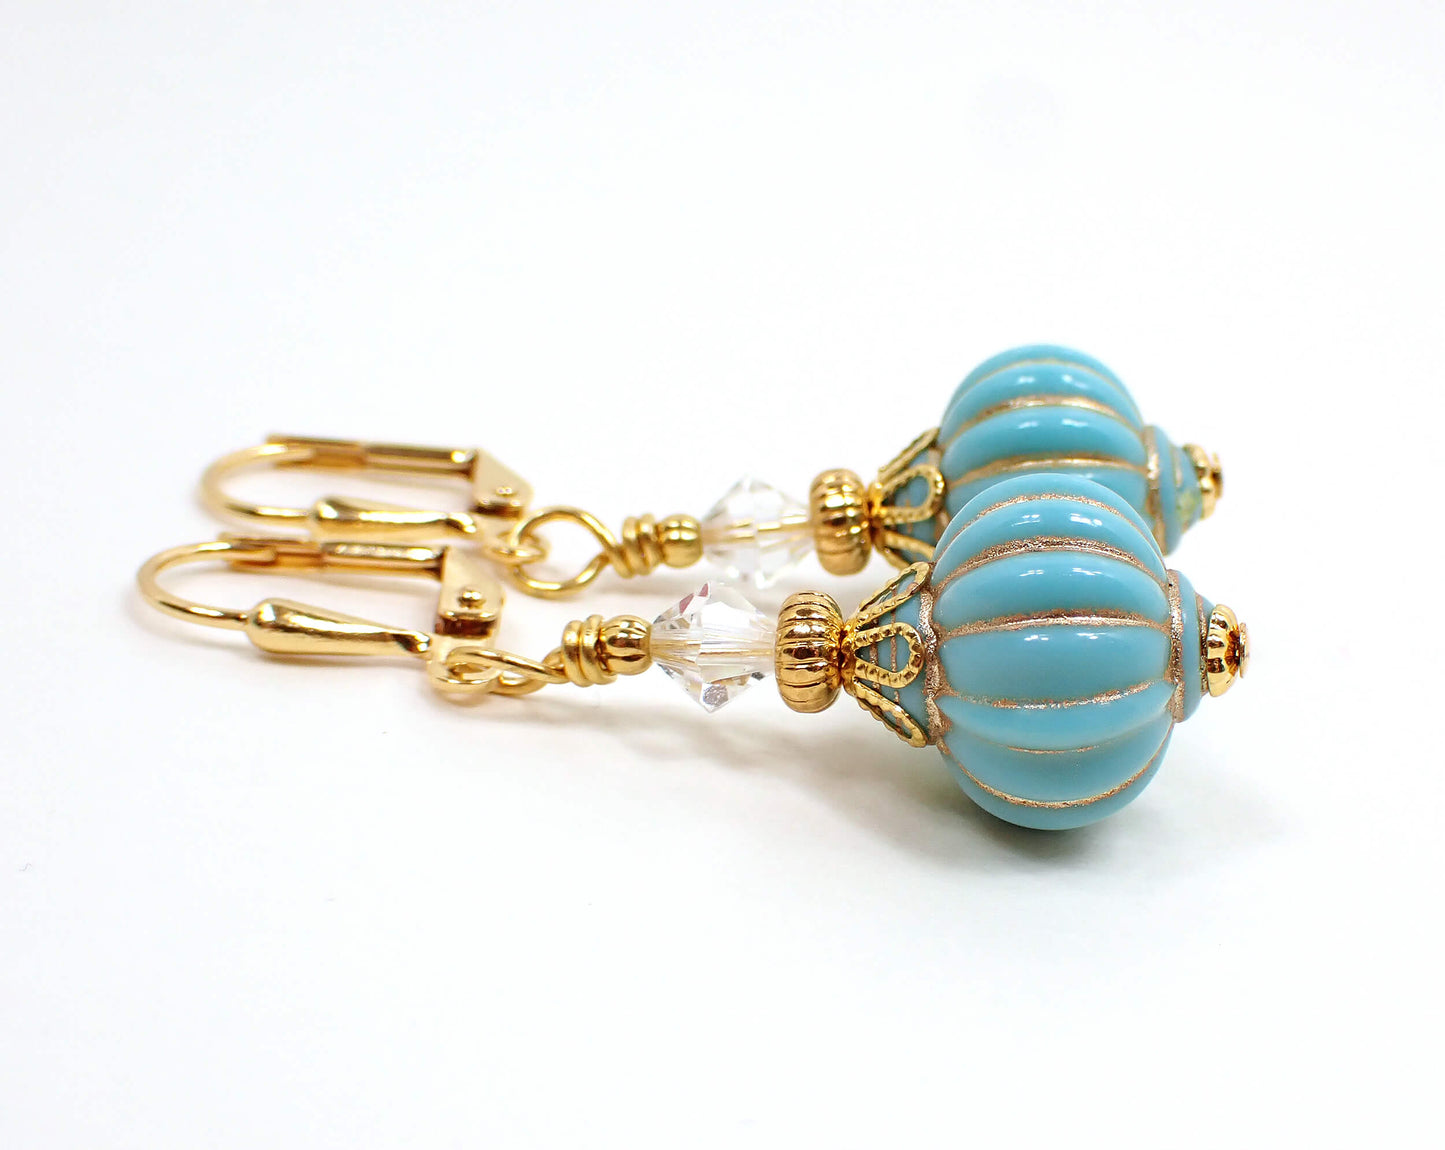 Blue Acrylic Handmade Striped Lantern Drop Earrings Gold Plated Hook Lever Back or Clip On